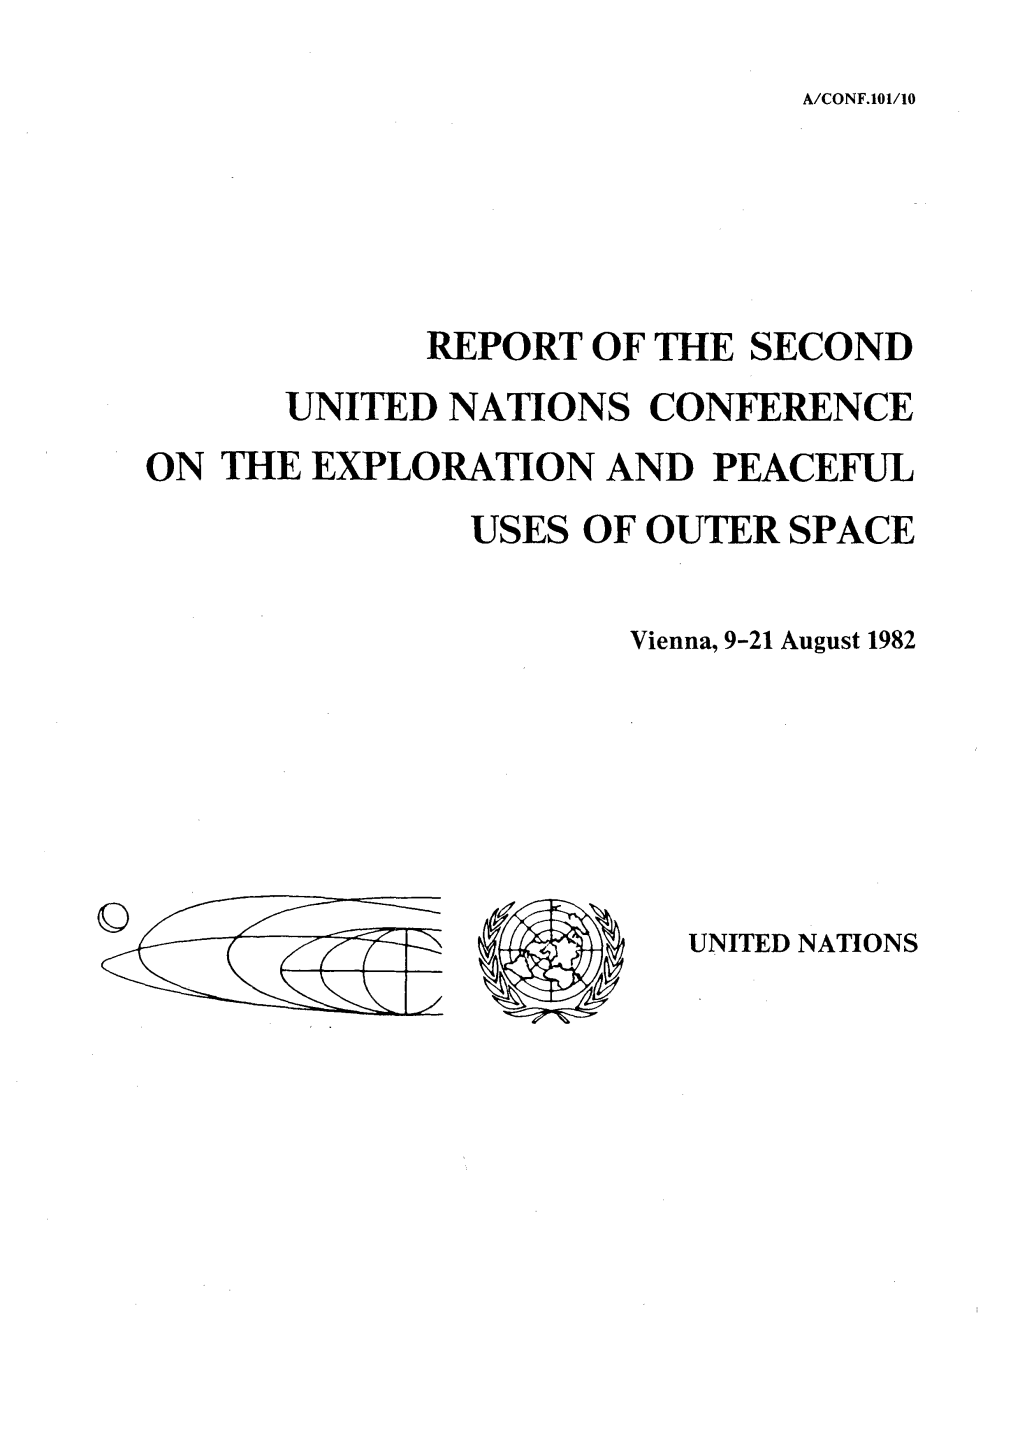 Report of the Second United Nations Conference on the Exploration and Peaceful Uses of Outer Space